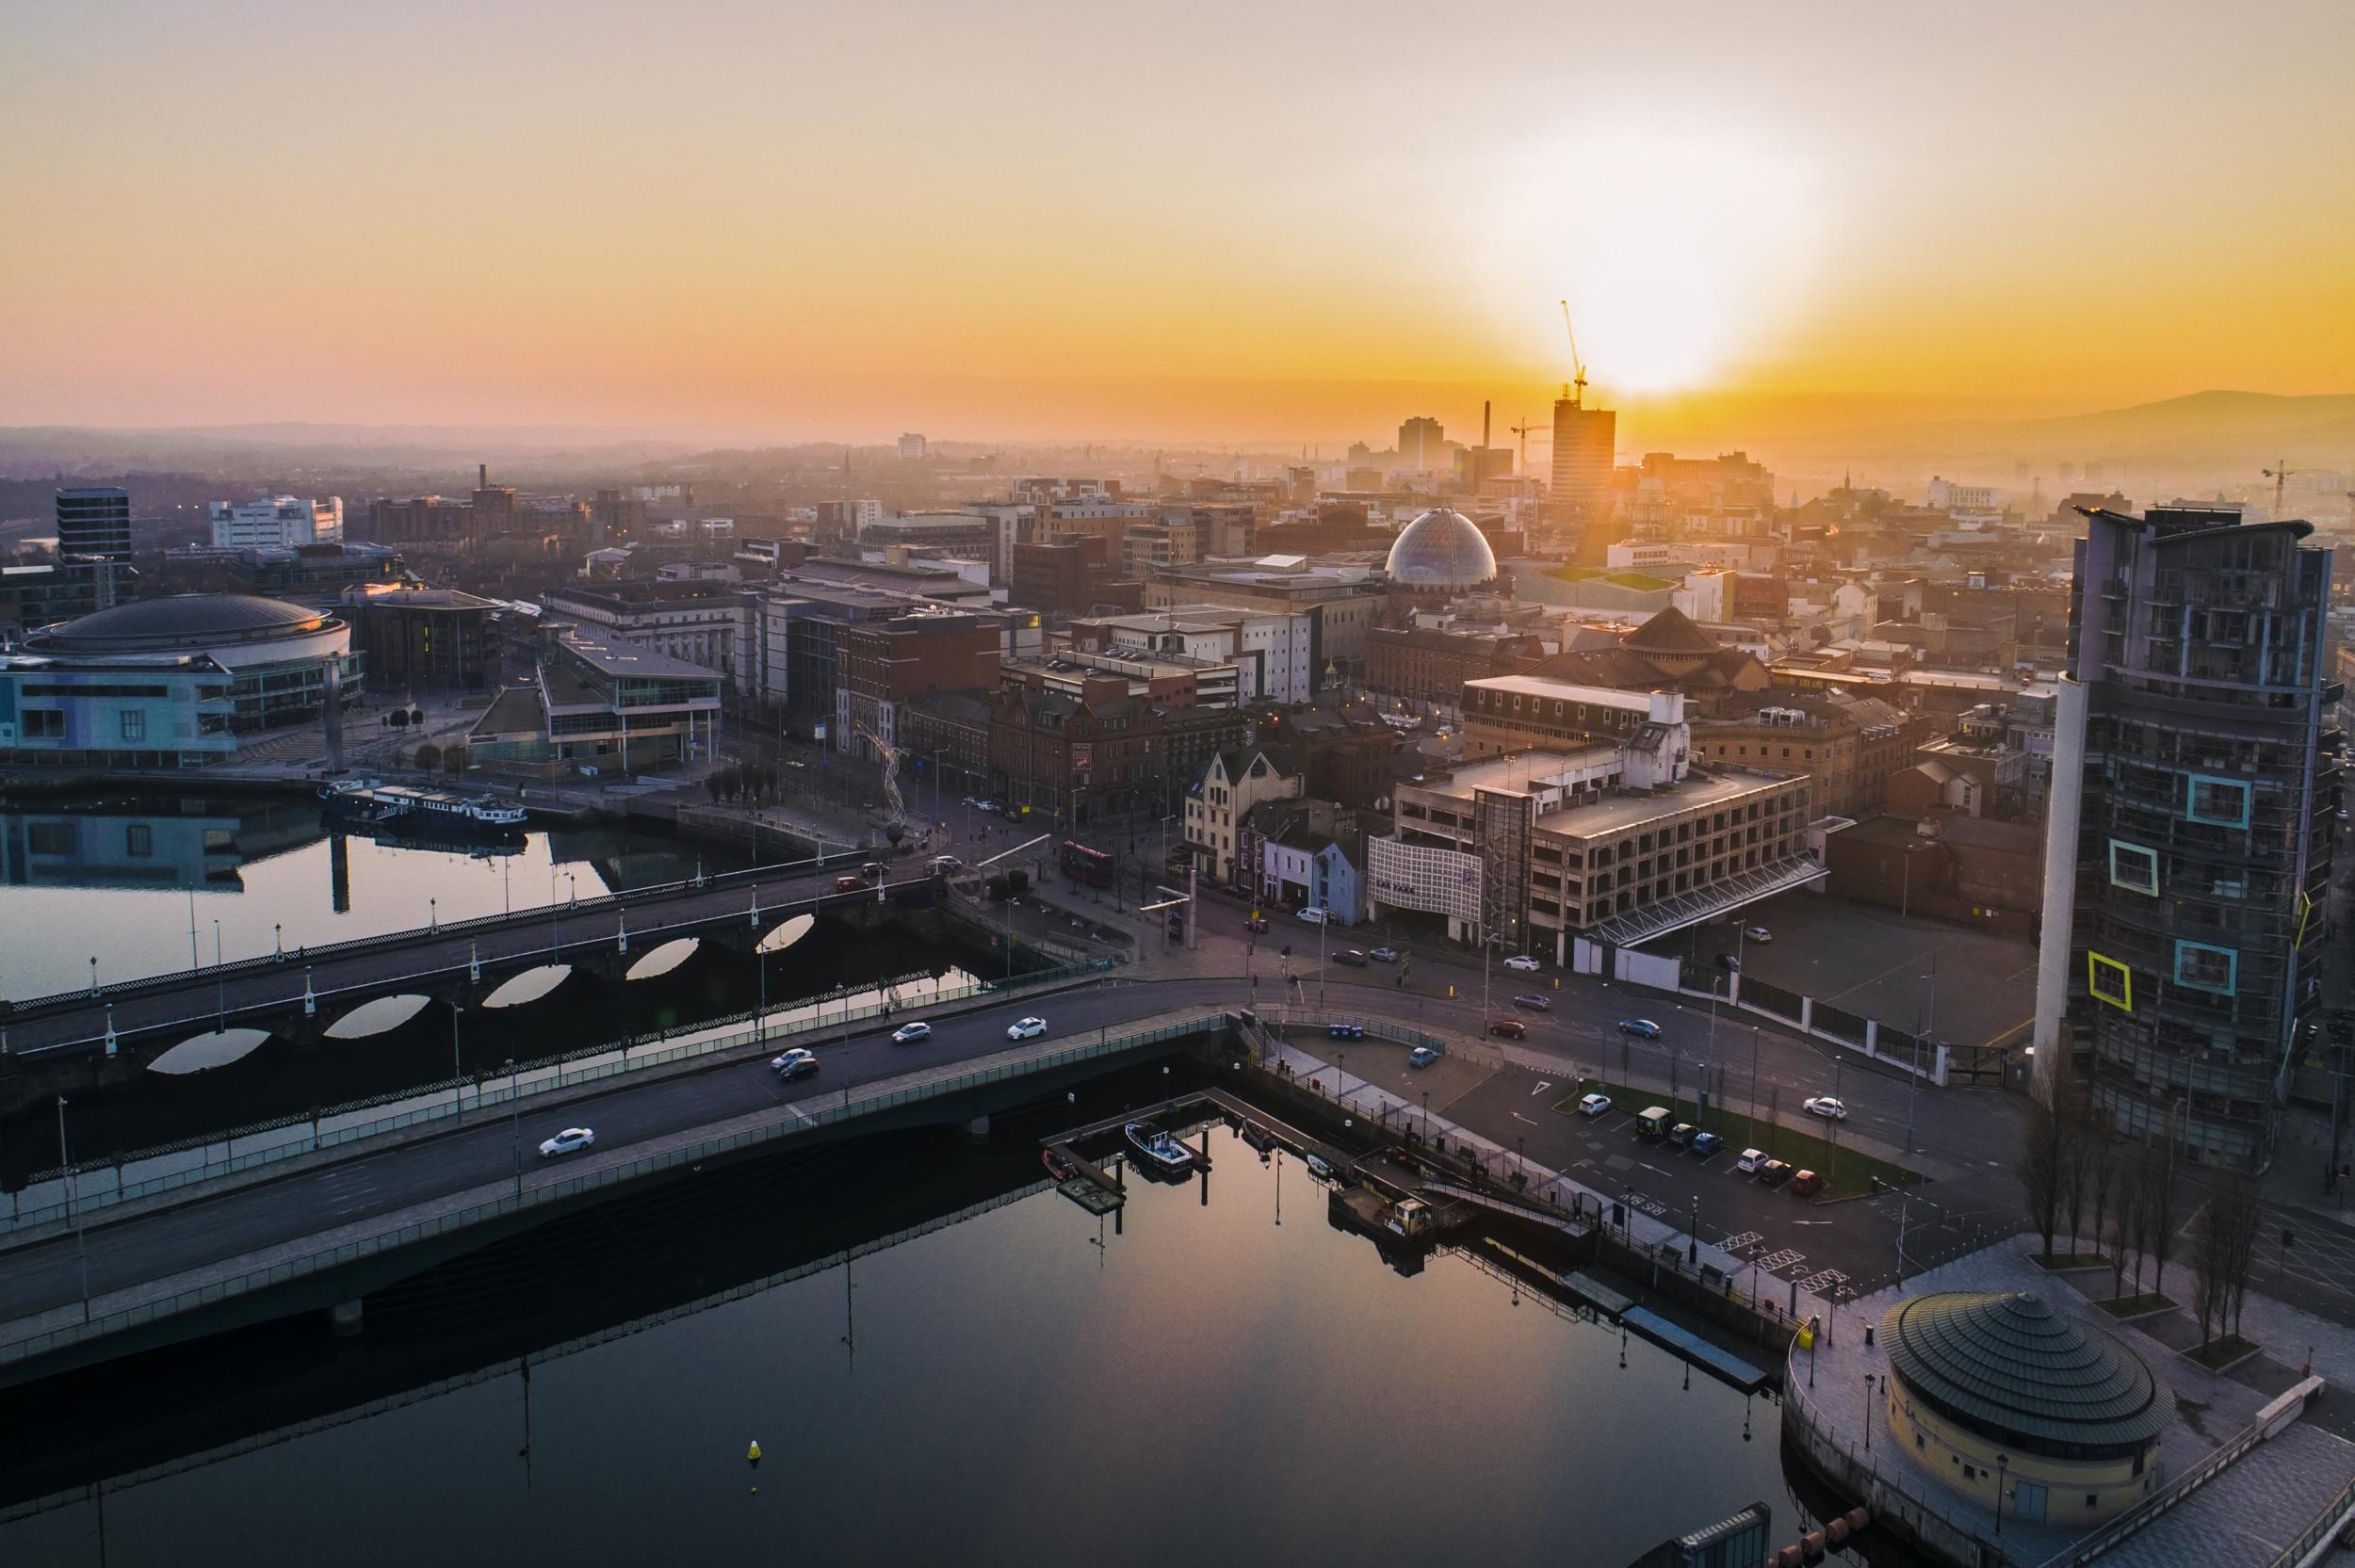 Belfast at sunset: an increased threat level does not mean any material changes for tourists